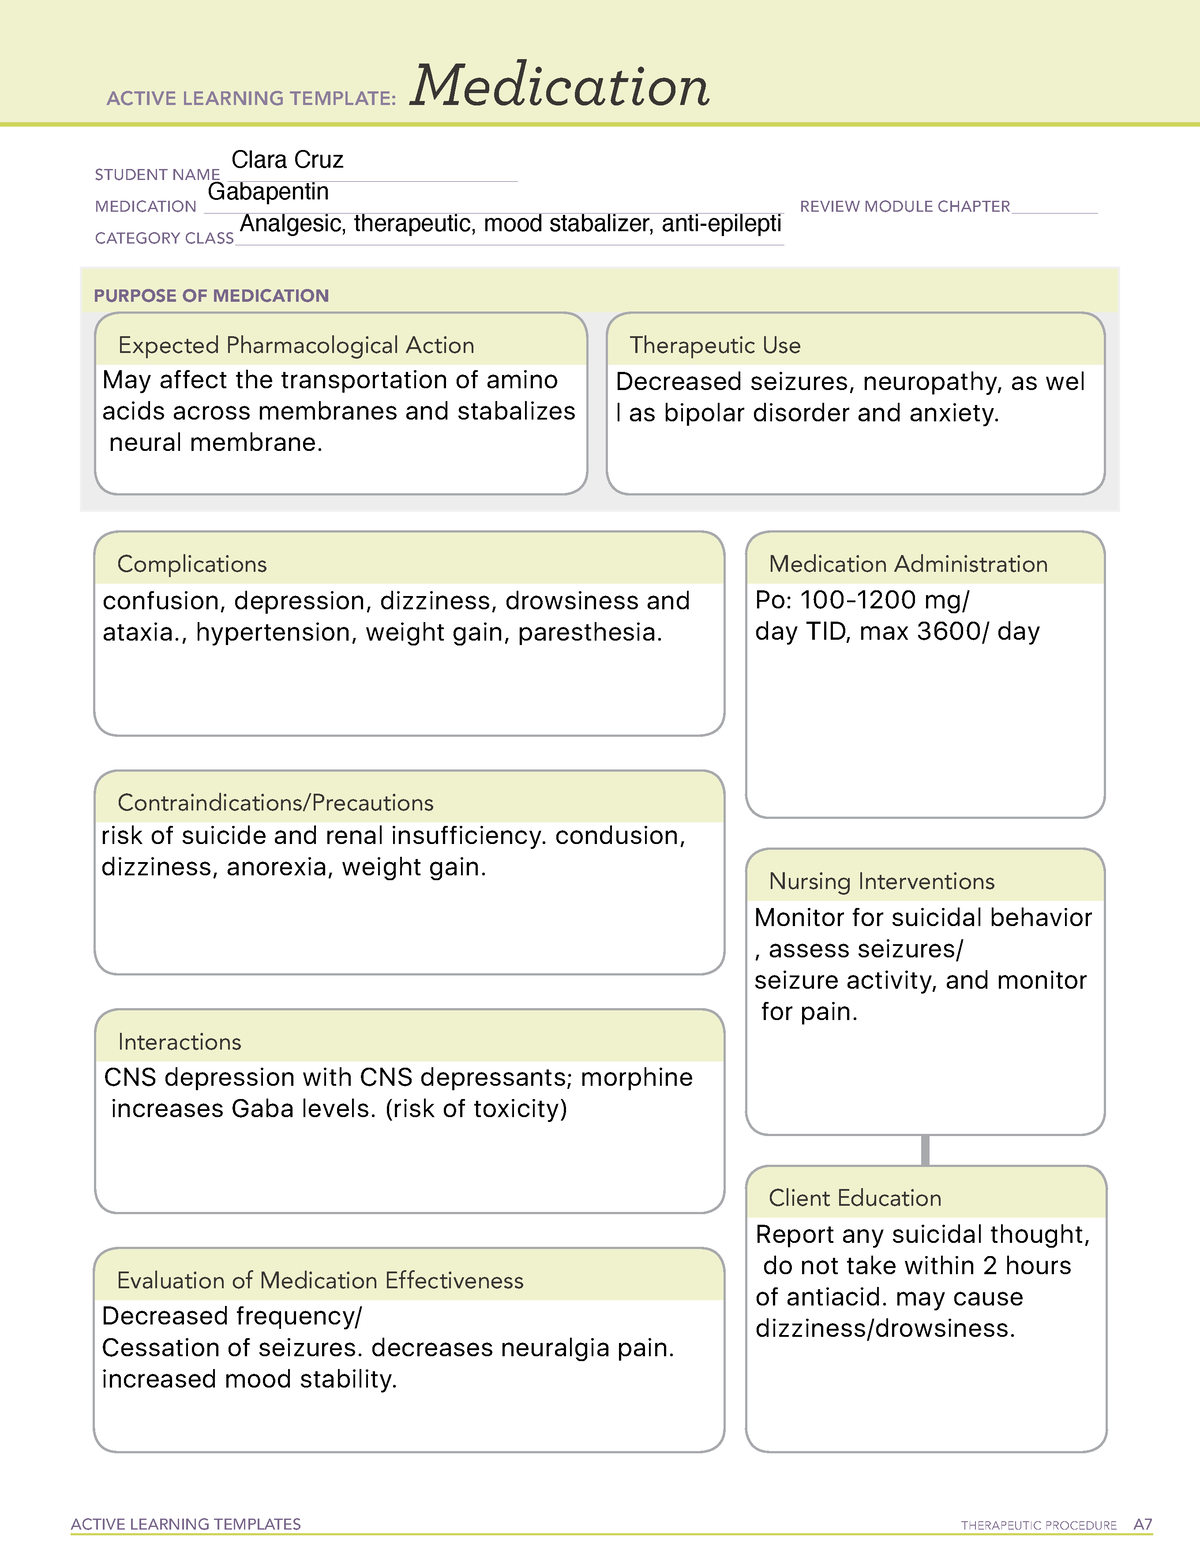 Med card Gabapentin ACTIVE LEARNING TEMPLATES THERAPEUTIC PROCEDURE A